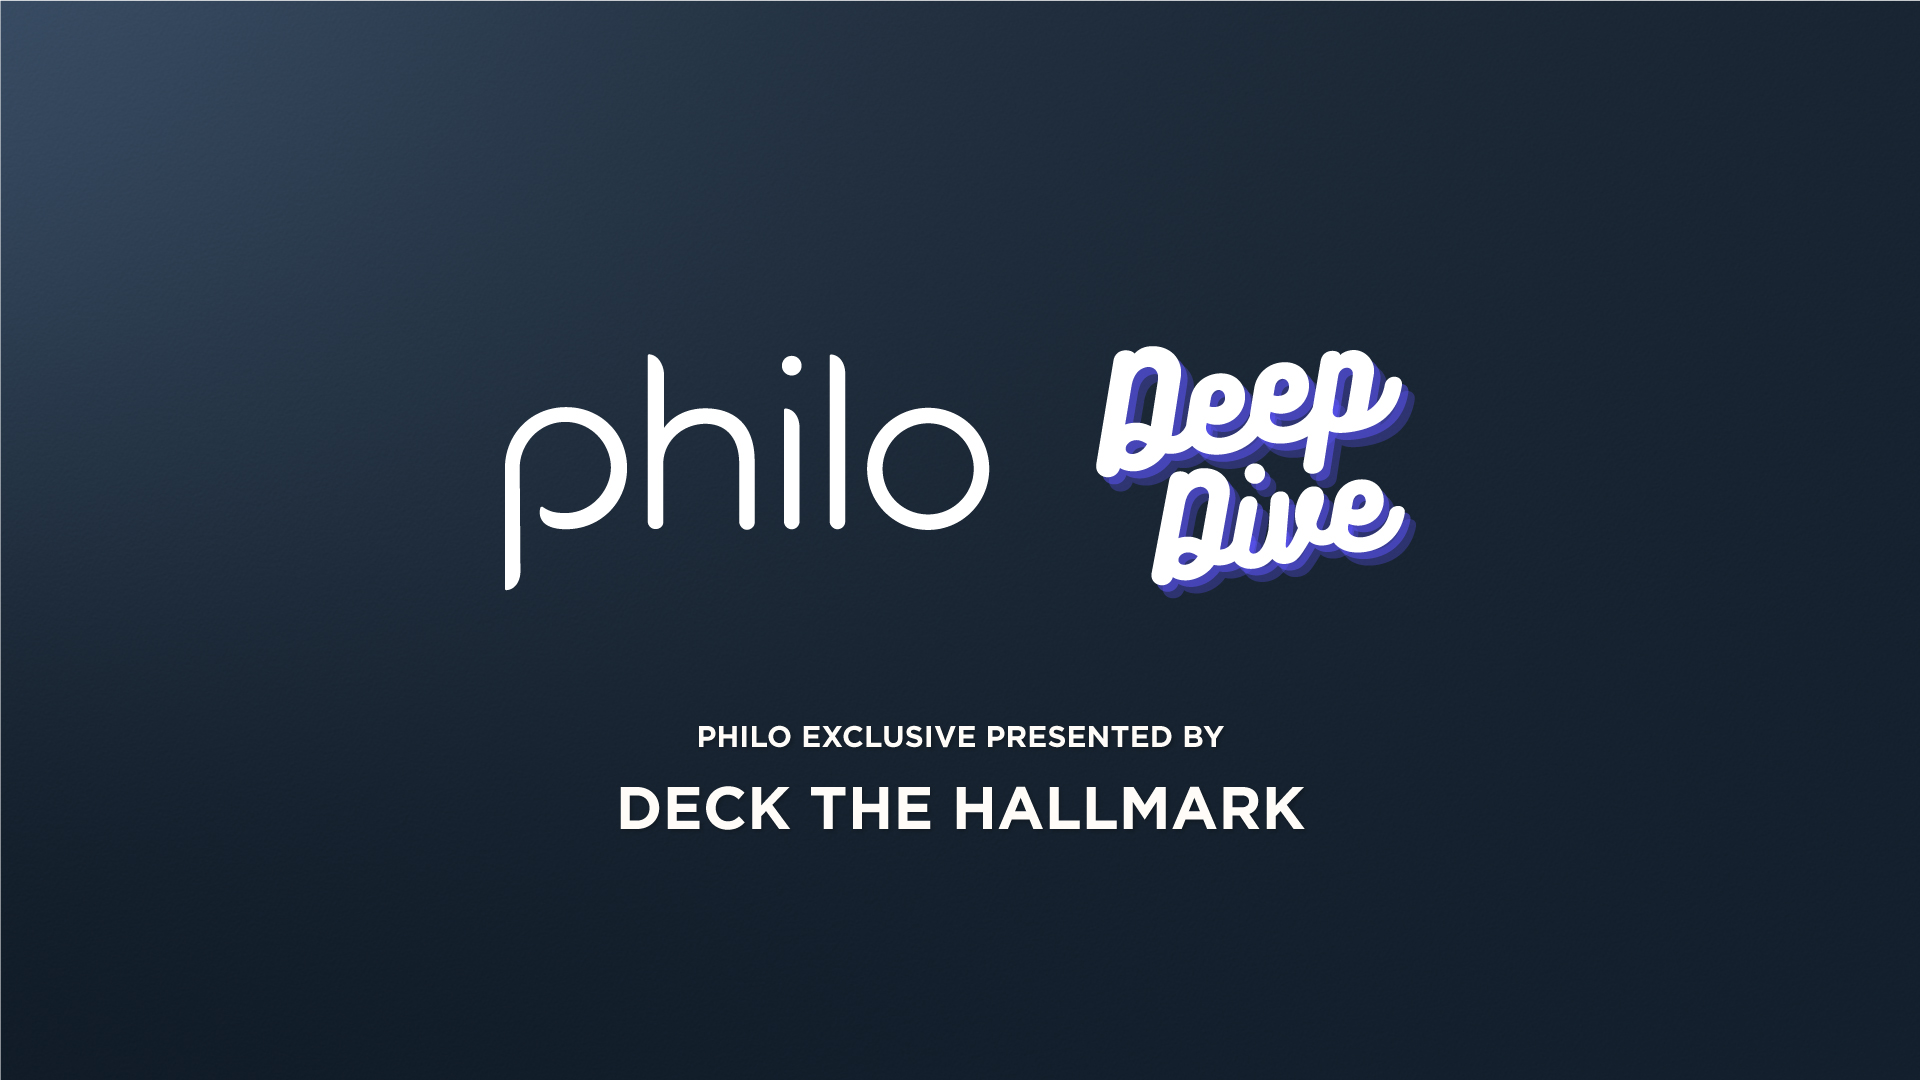 A graphic shows Philo's new unique show, the Philo Deep Dive, created by the Deck The Hallmark crew.